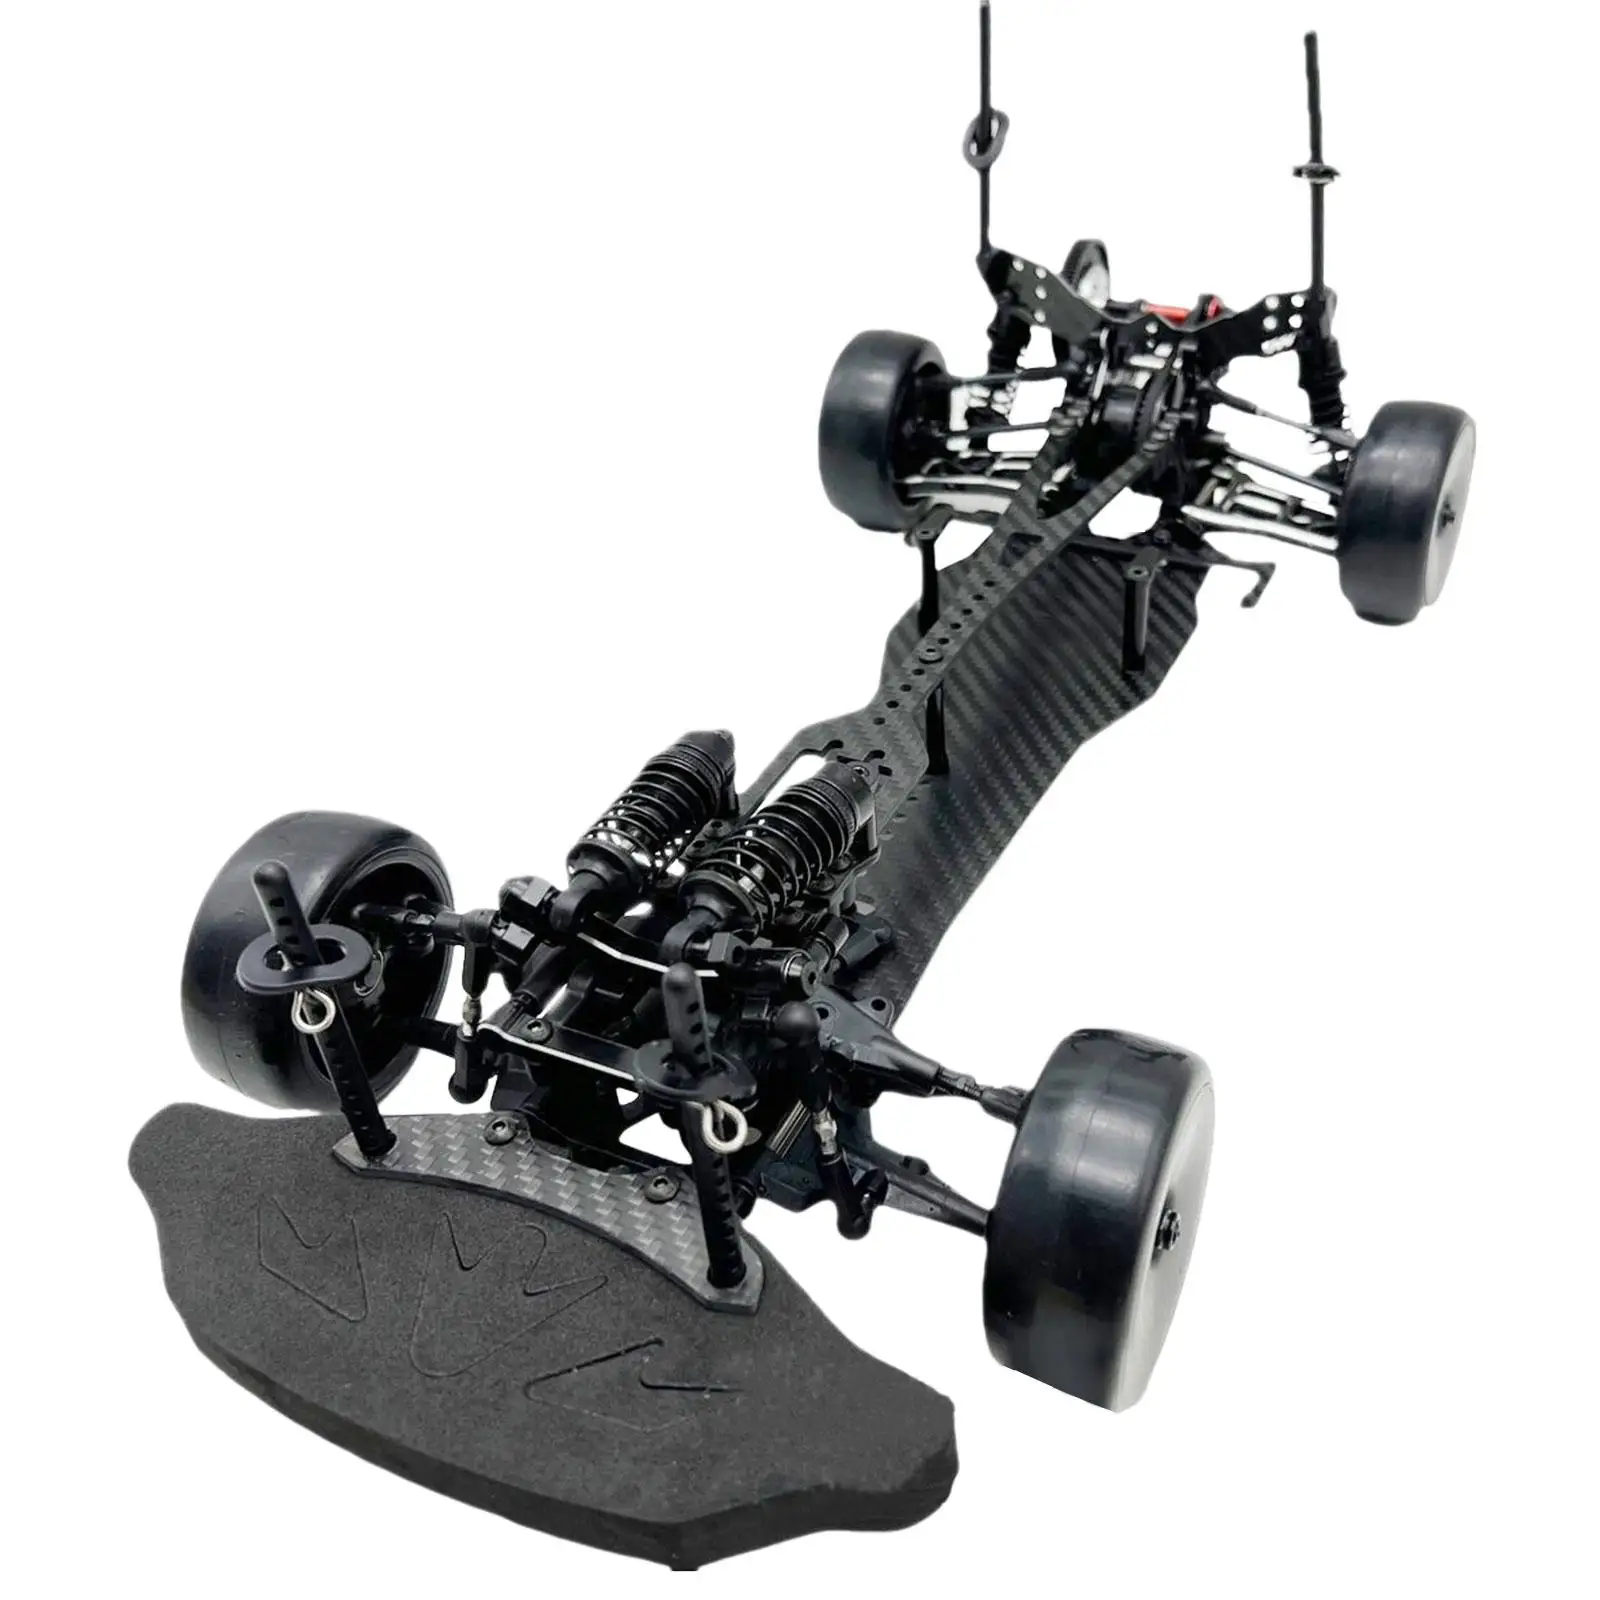 

1/10 RC Touring Car Chassis Frame Body Kits D5 Gear Ratio of 1:47 Adjustable